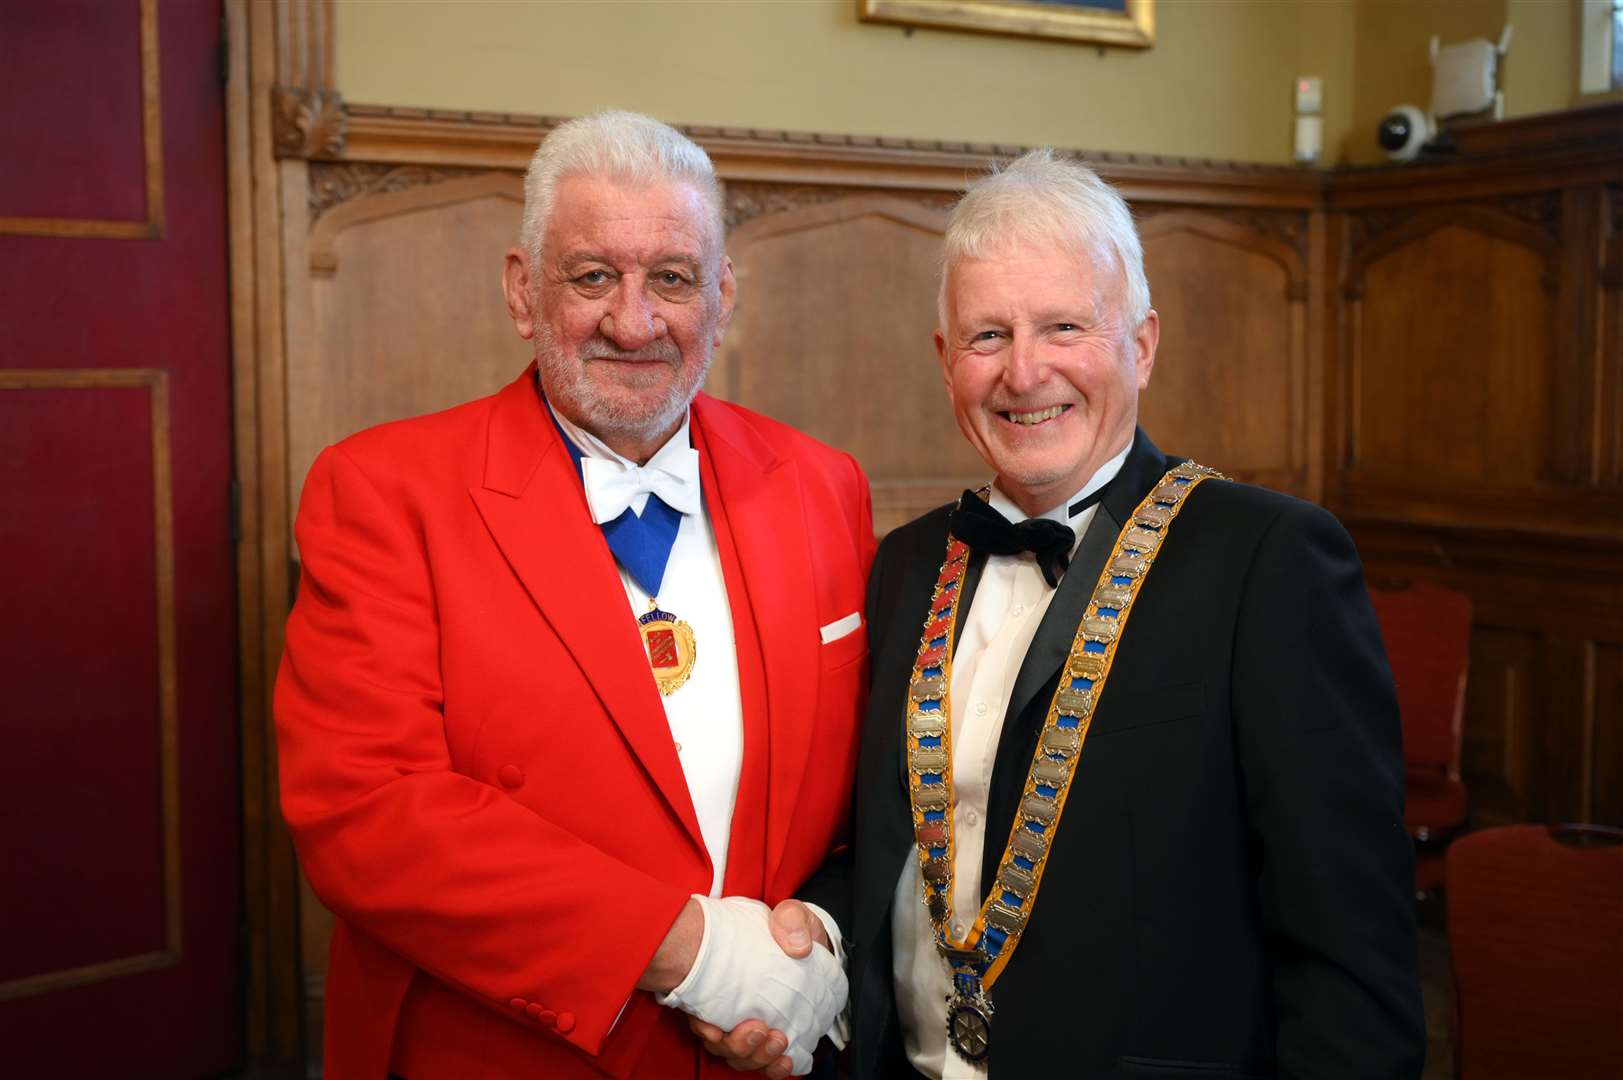 Current president of Priory Rotary club, Jonathan Holmes, pictured right